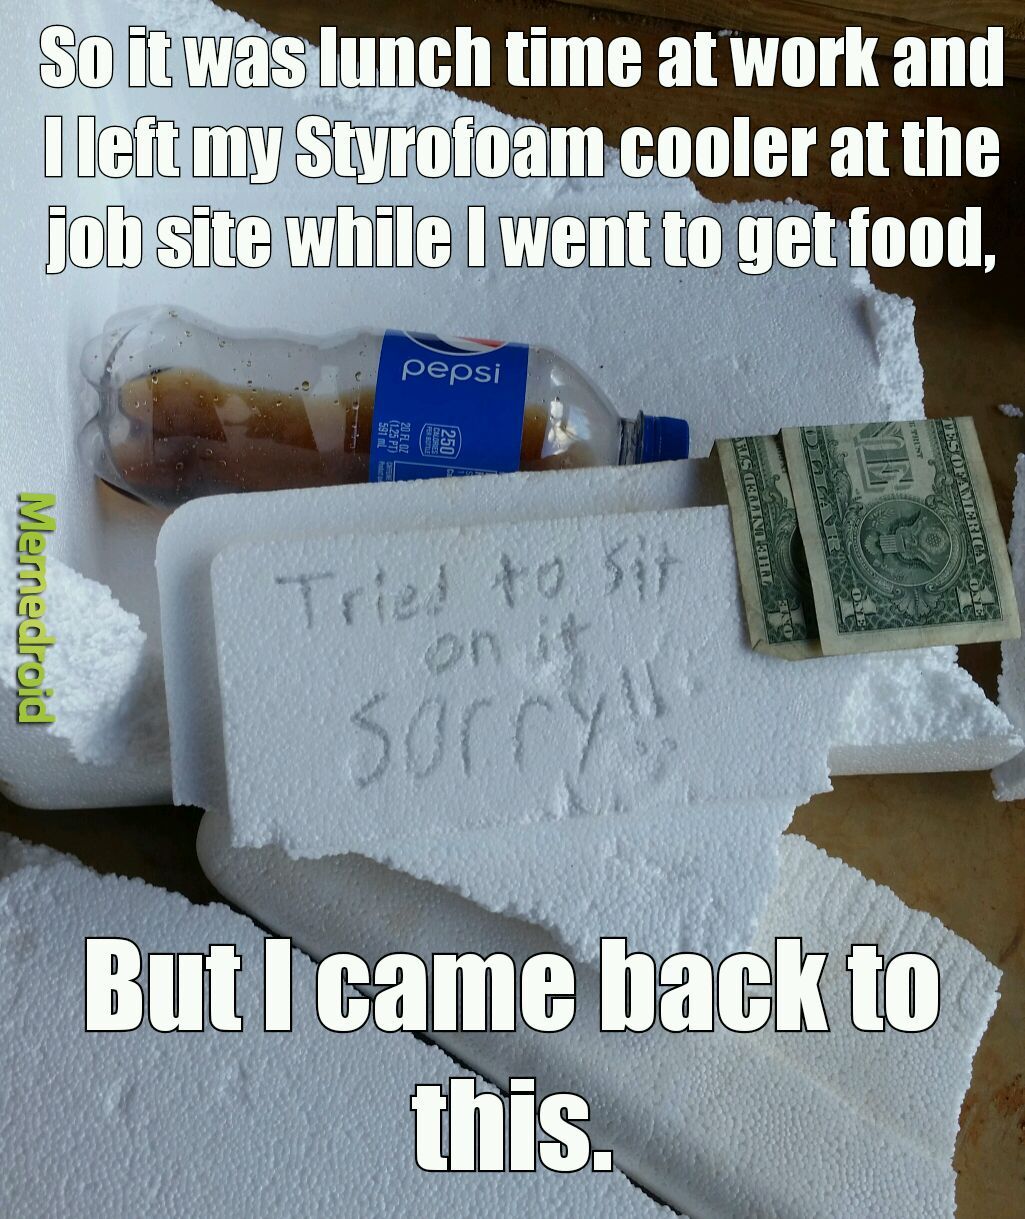 Earlier today at work... I liked that cooler :c - meme